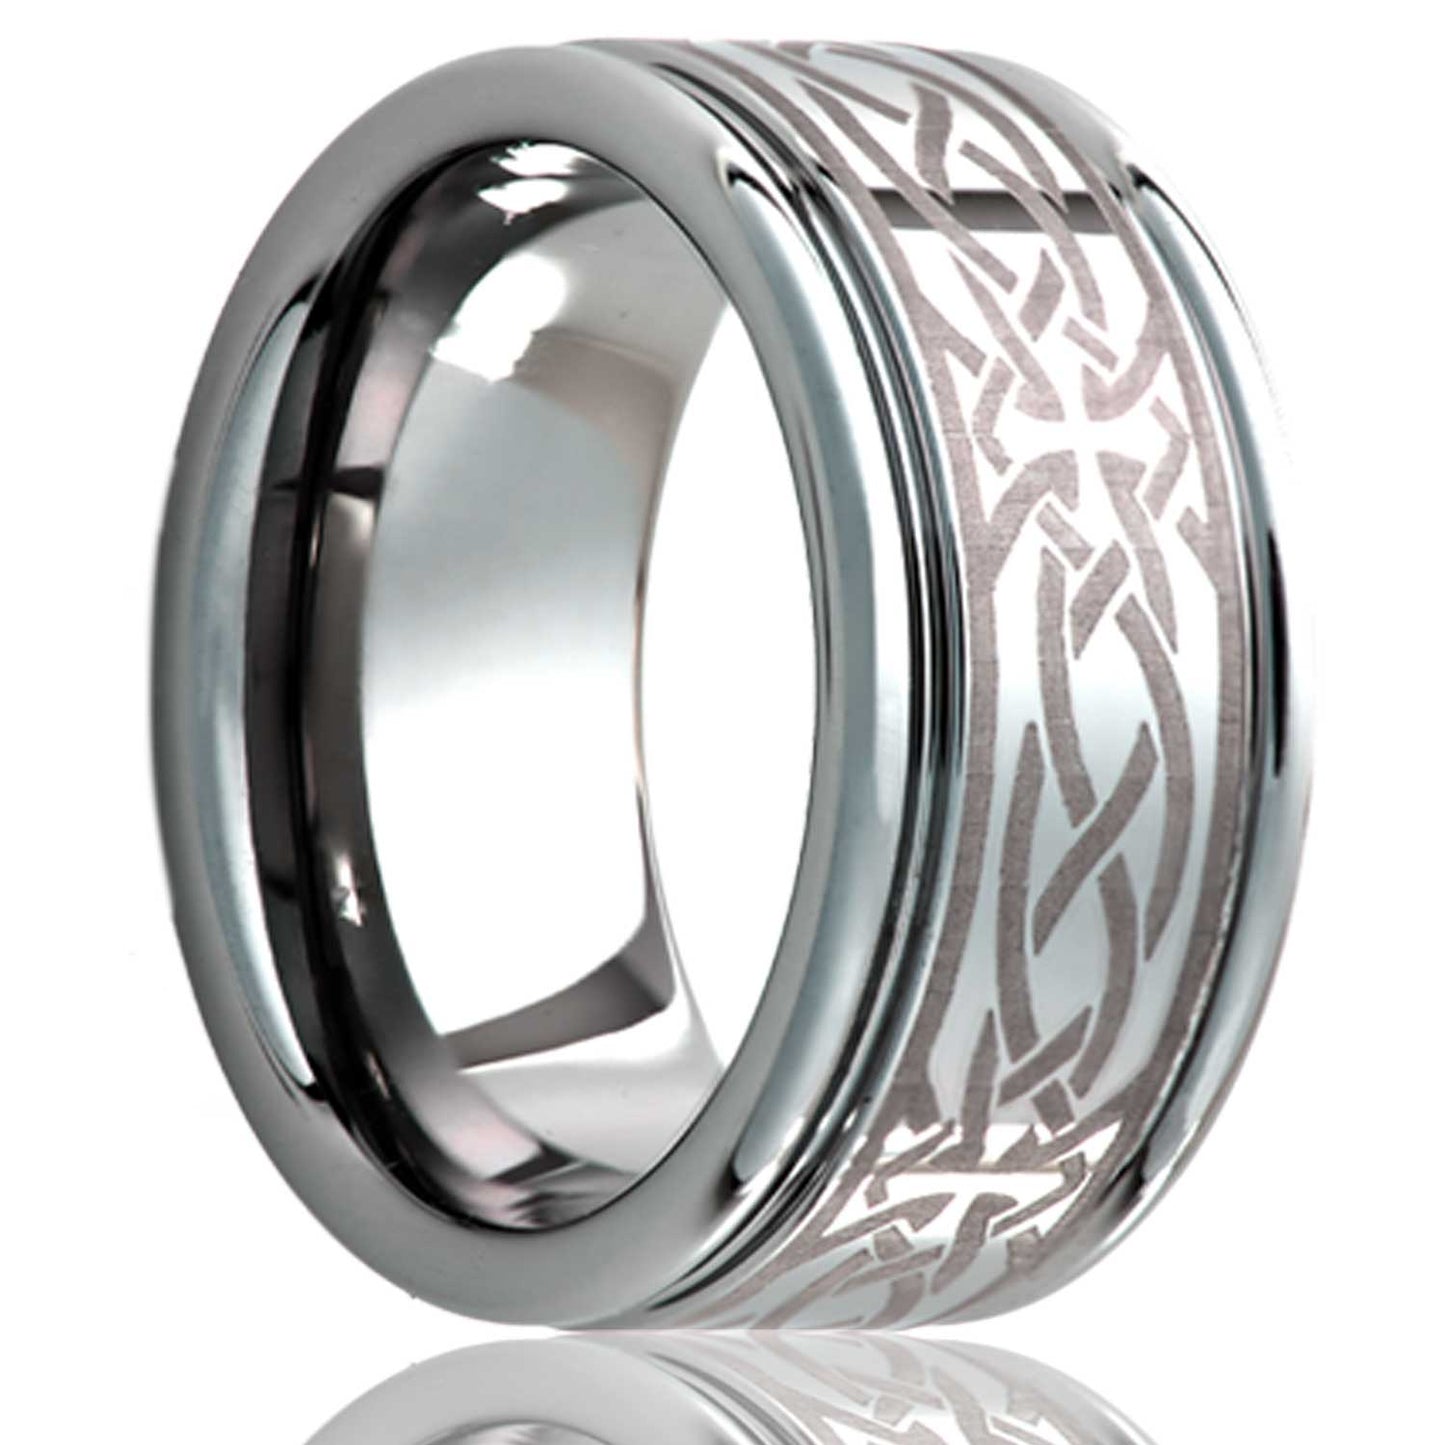 A celtic cross knot grooved cobalt wedding band displayed on a neutral white background.